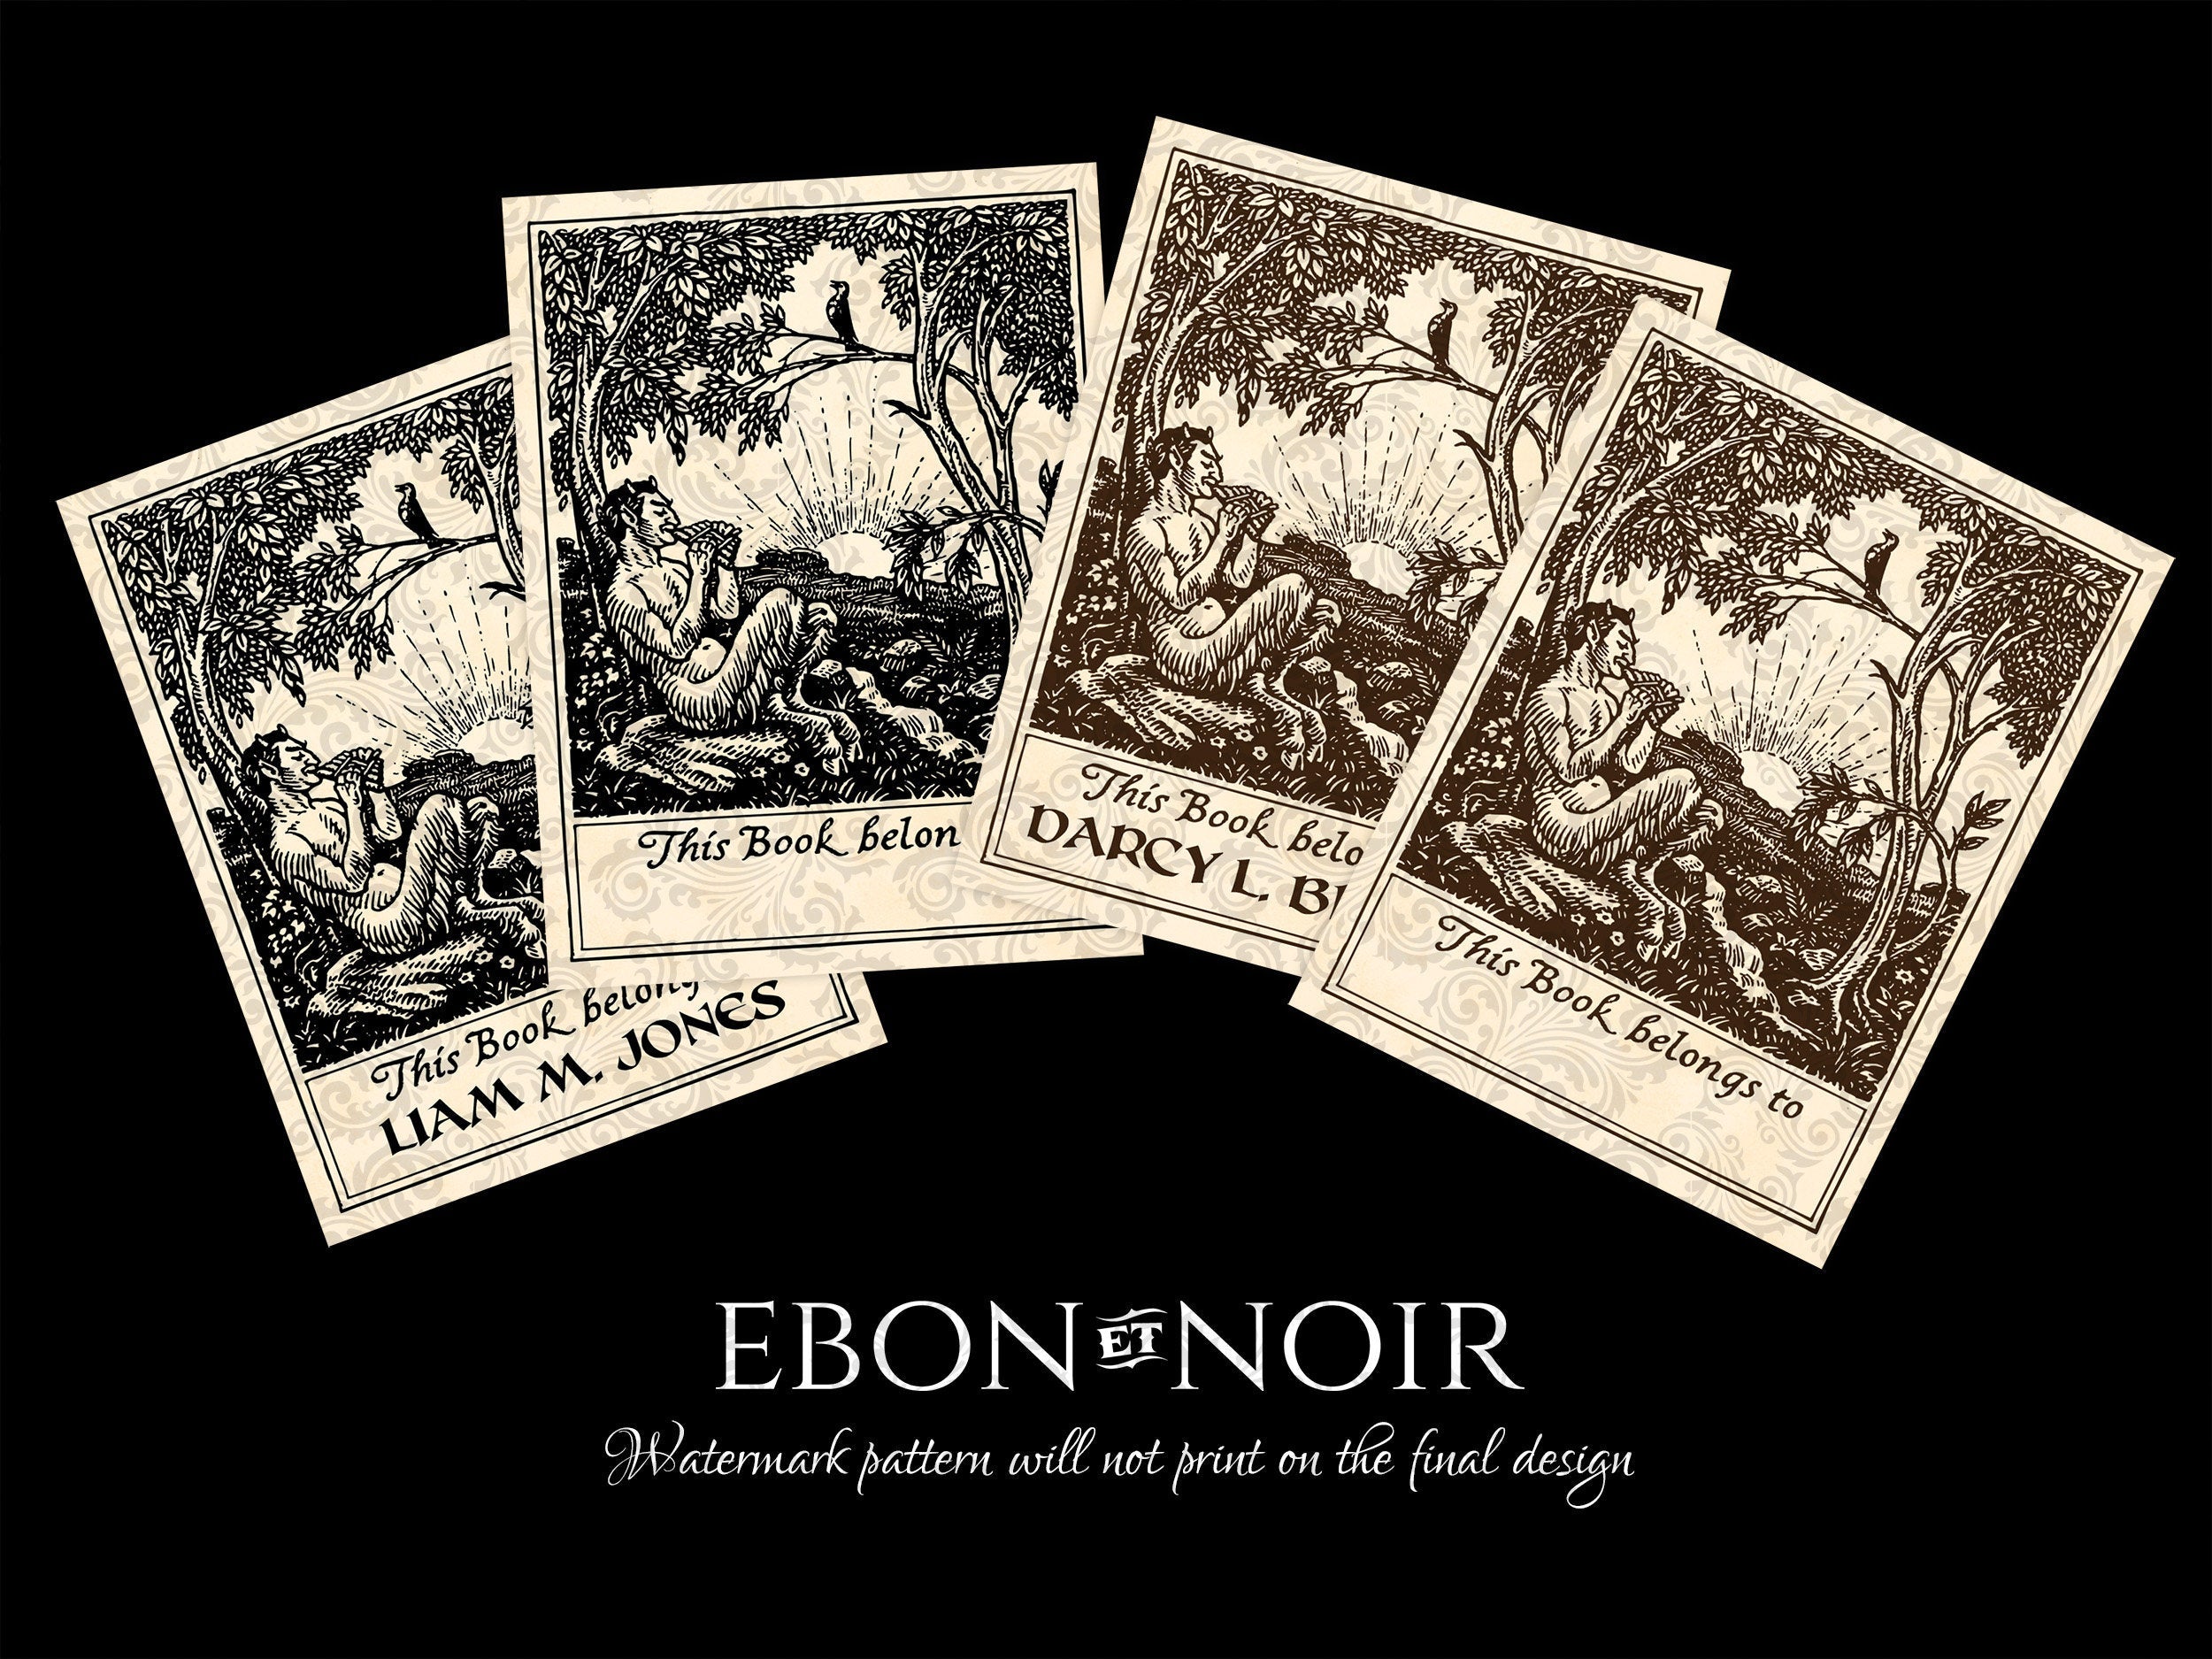 Satyr Playing Pan Pipes, Personalized, Ex-Libris Bookplates, Crafted on Traditional Gummed Paper, 3in x 4in, Set of 30